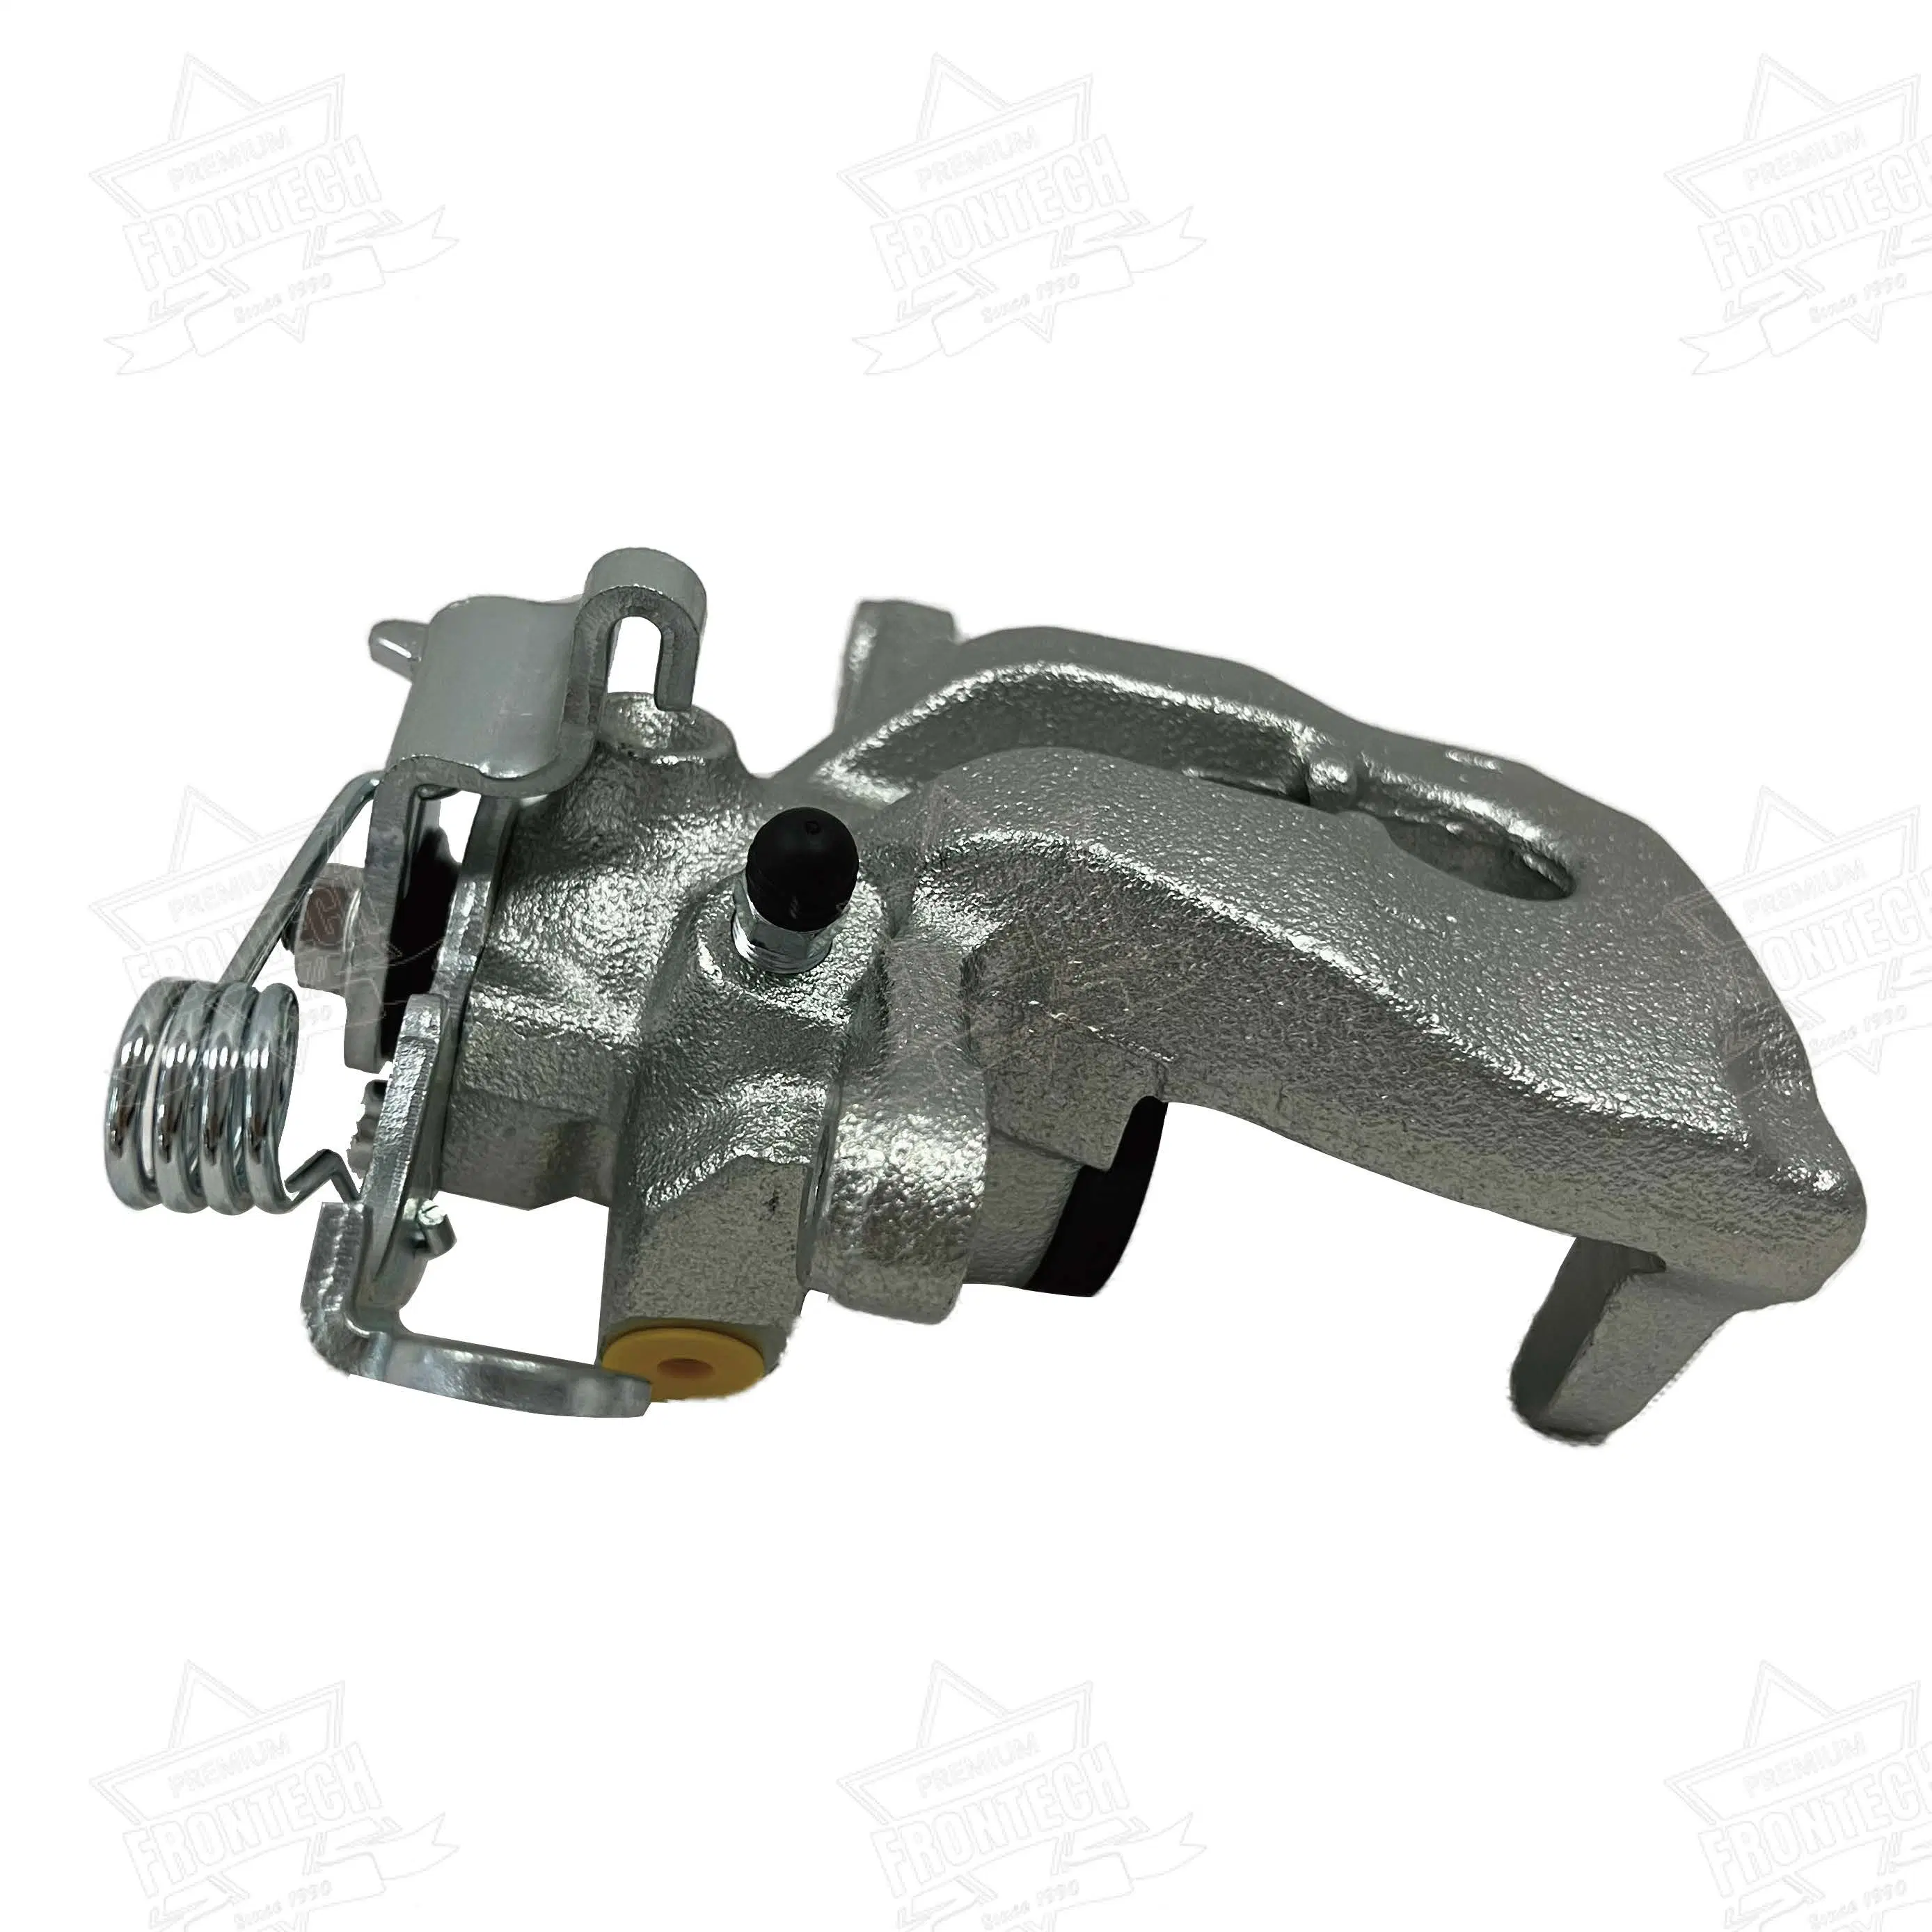 Frontech Brake Calipers Vehicle Parts & Accessories High Performance